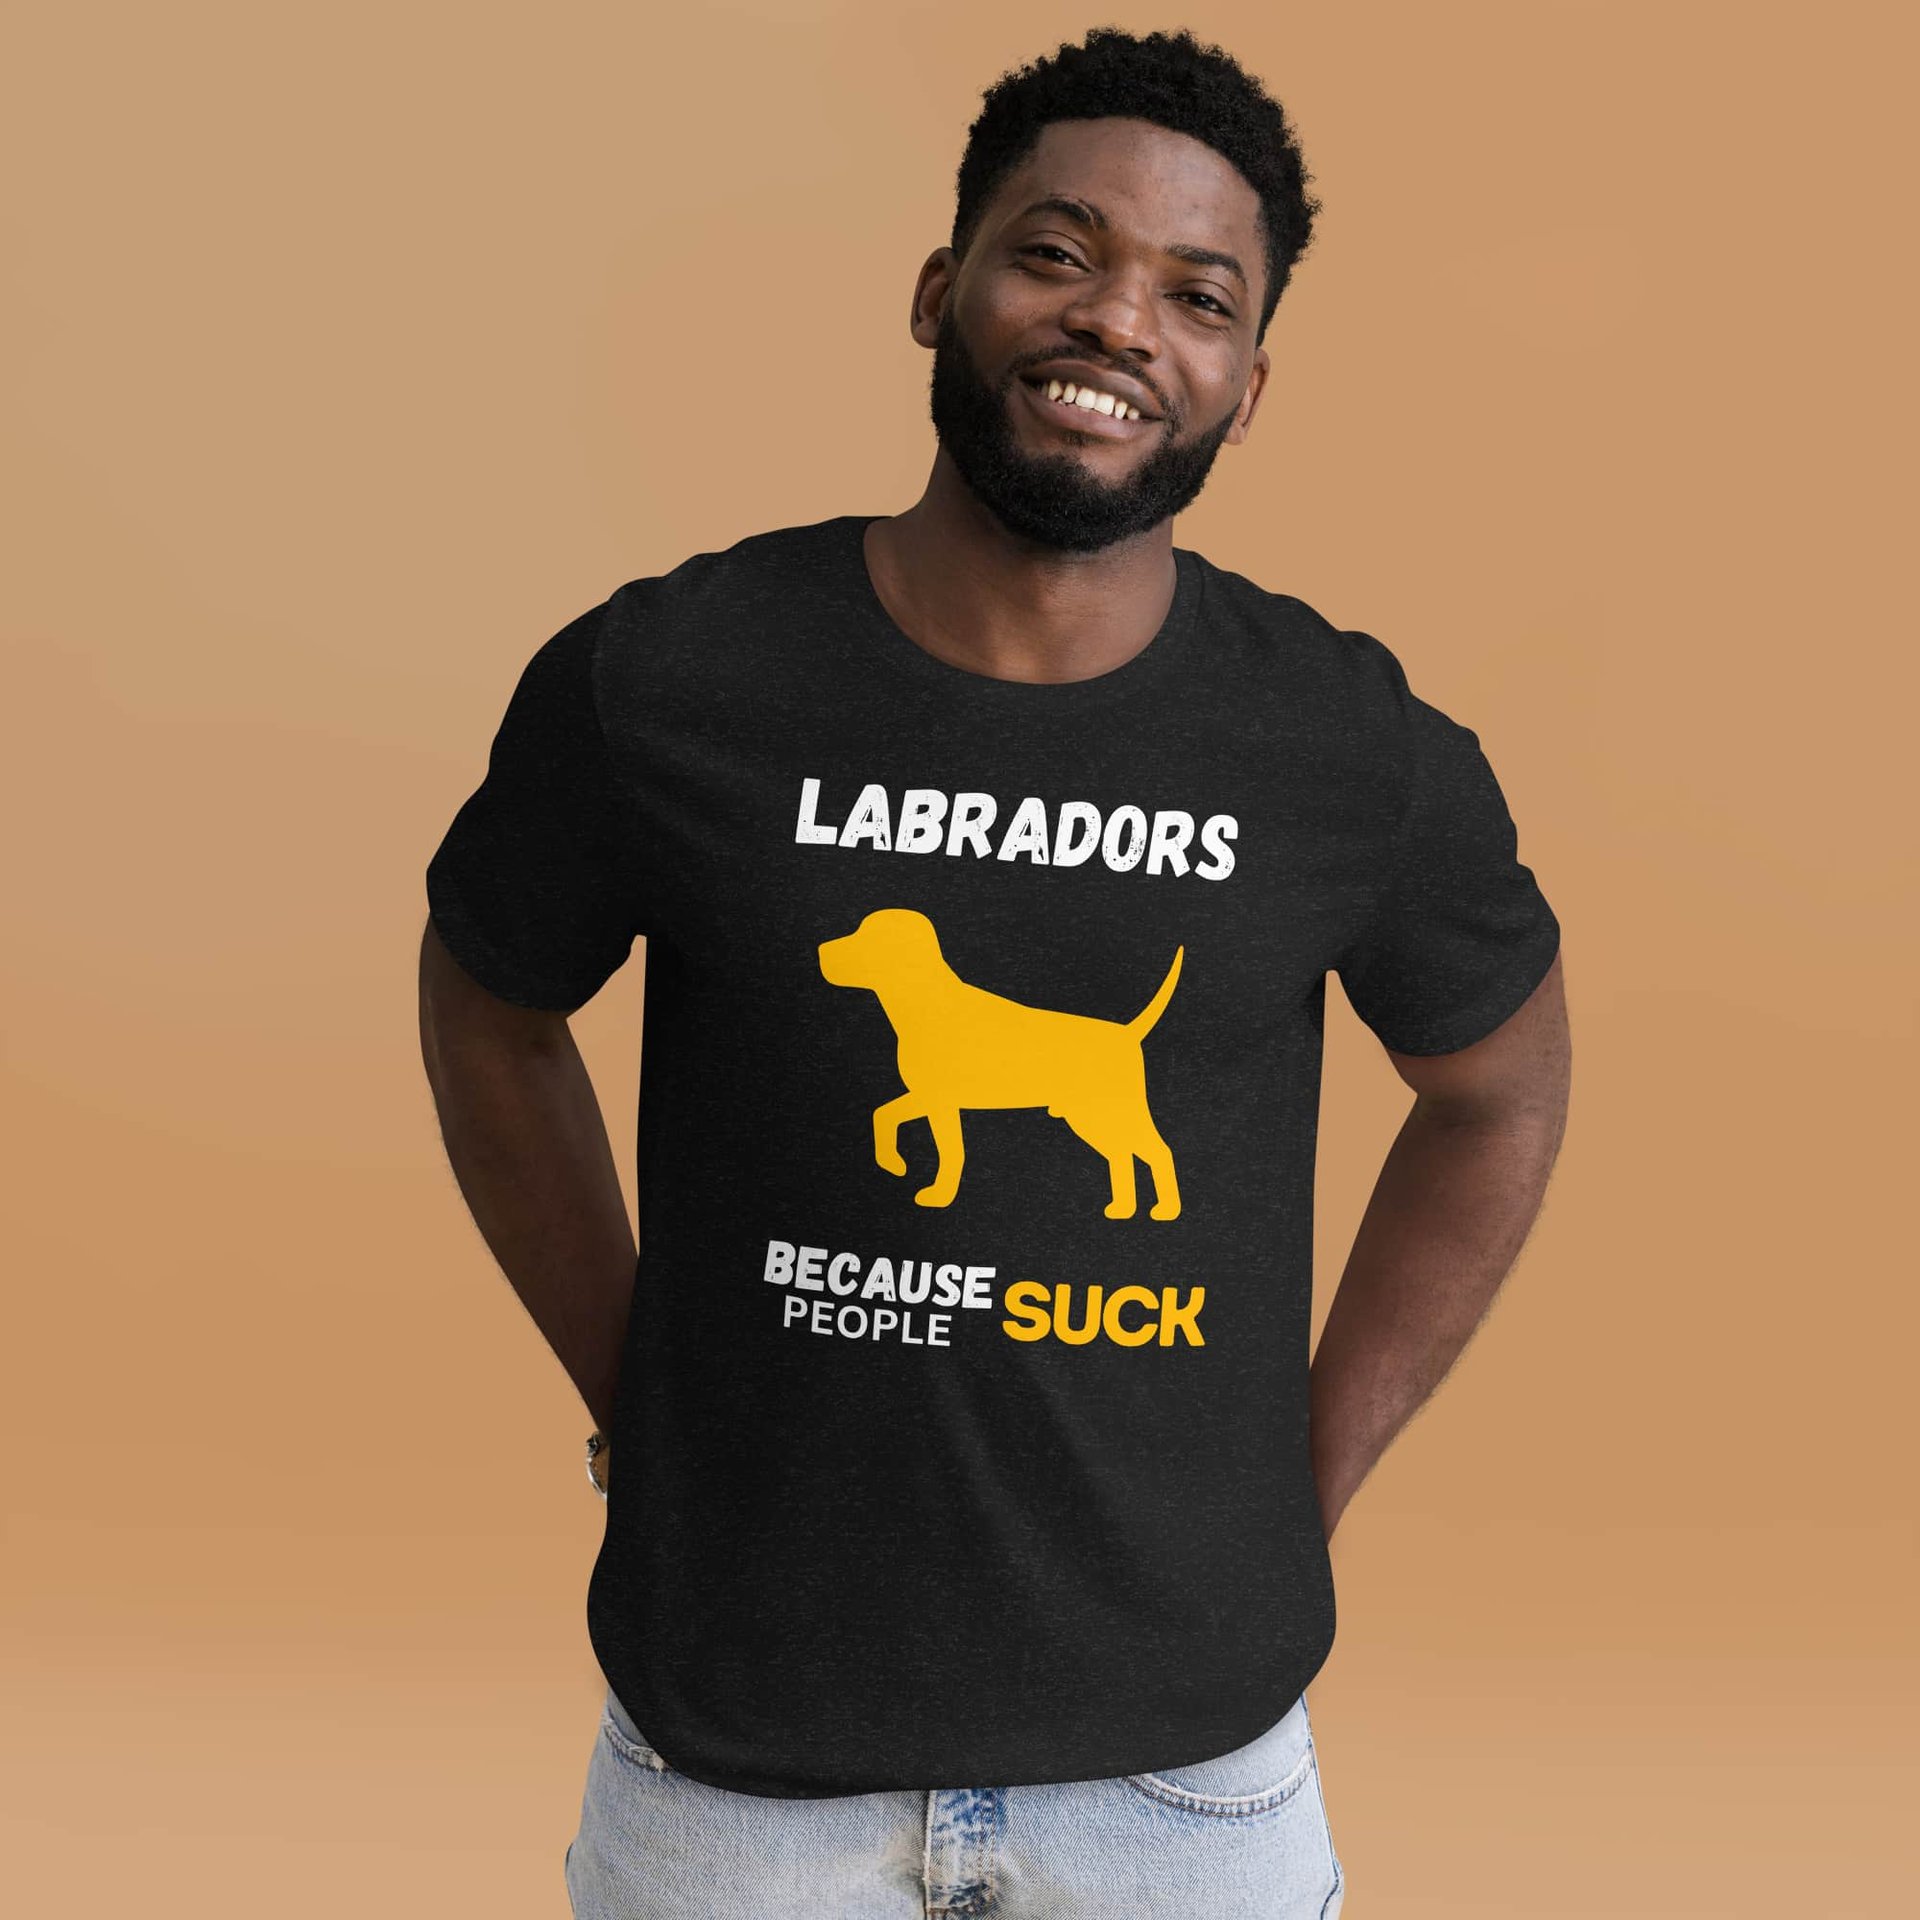 Labradors Because People Suck Unisex T-Shirt male t